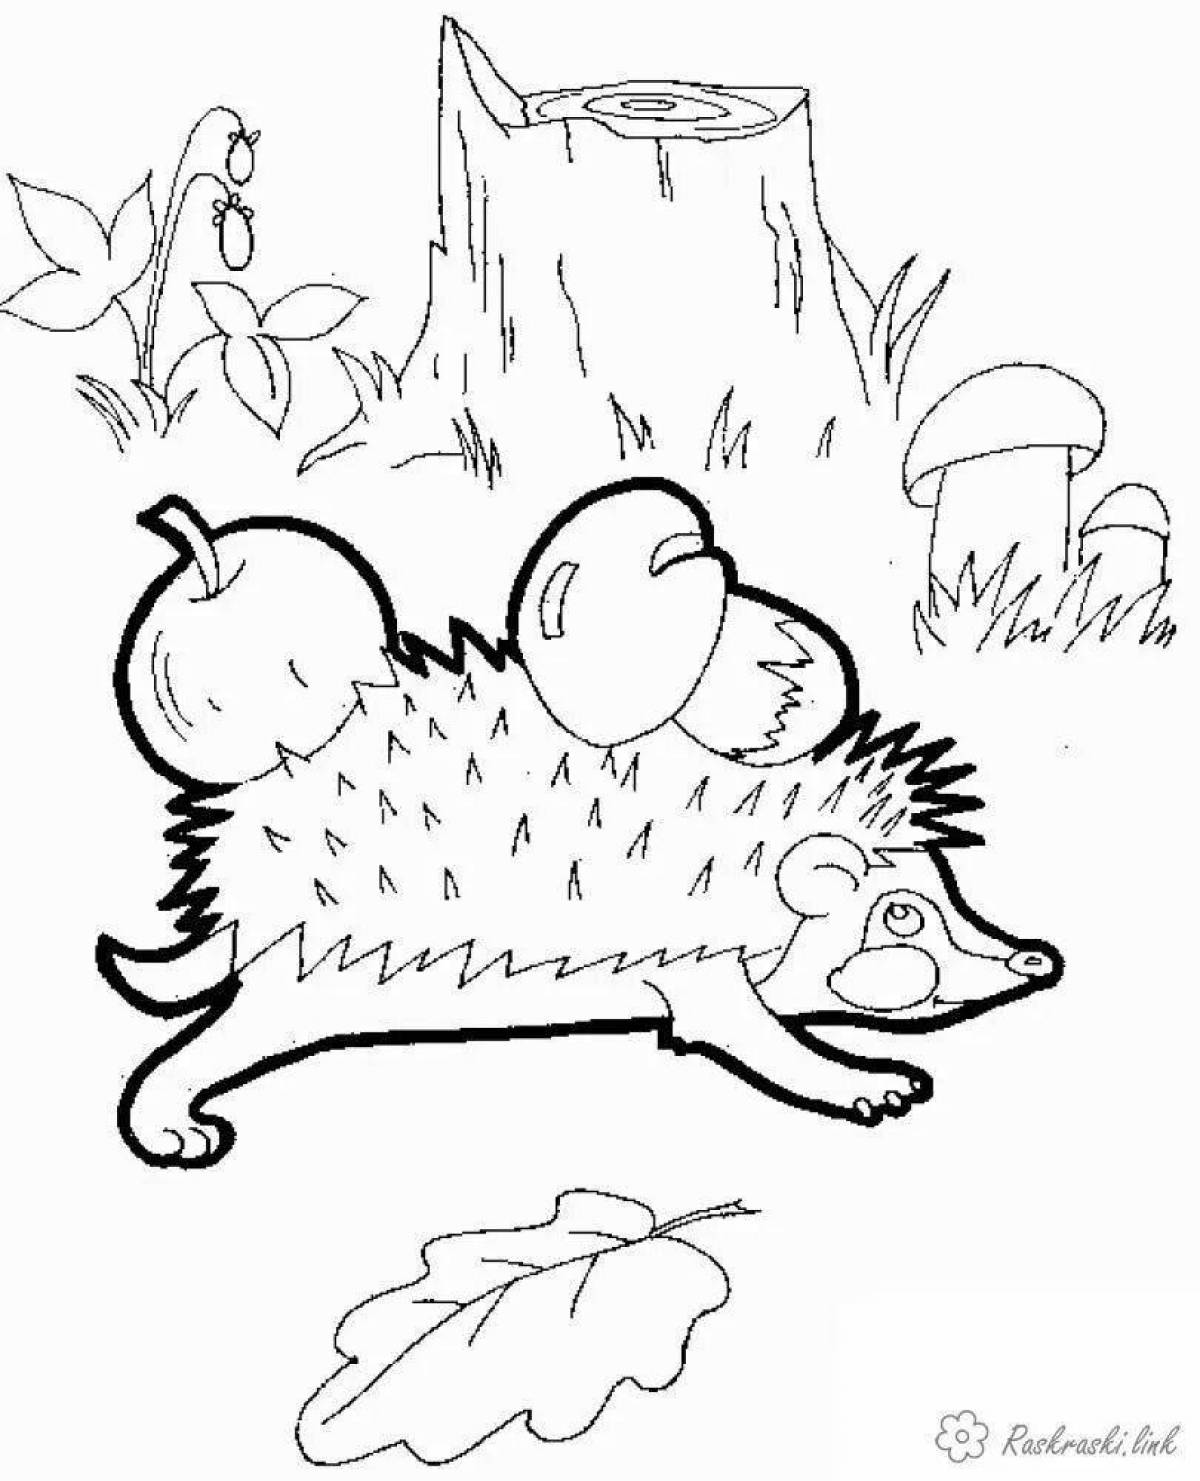 Hedgehog in the forest